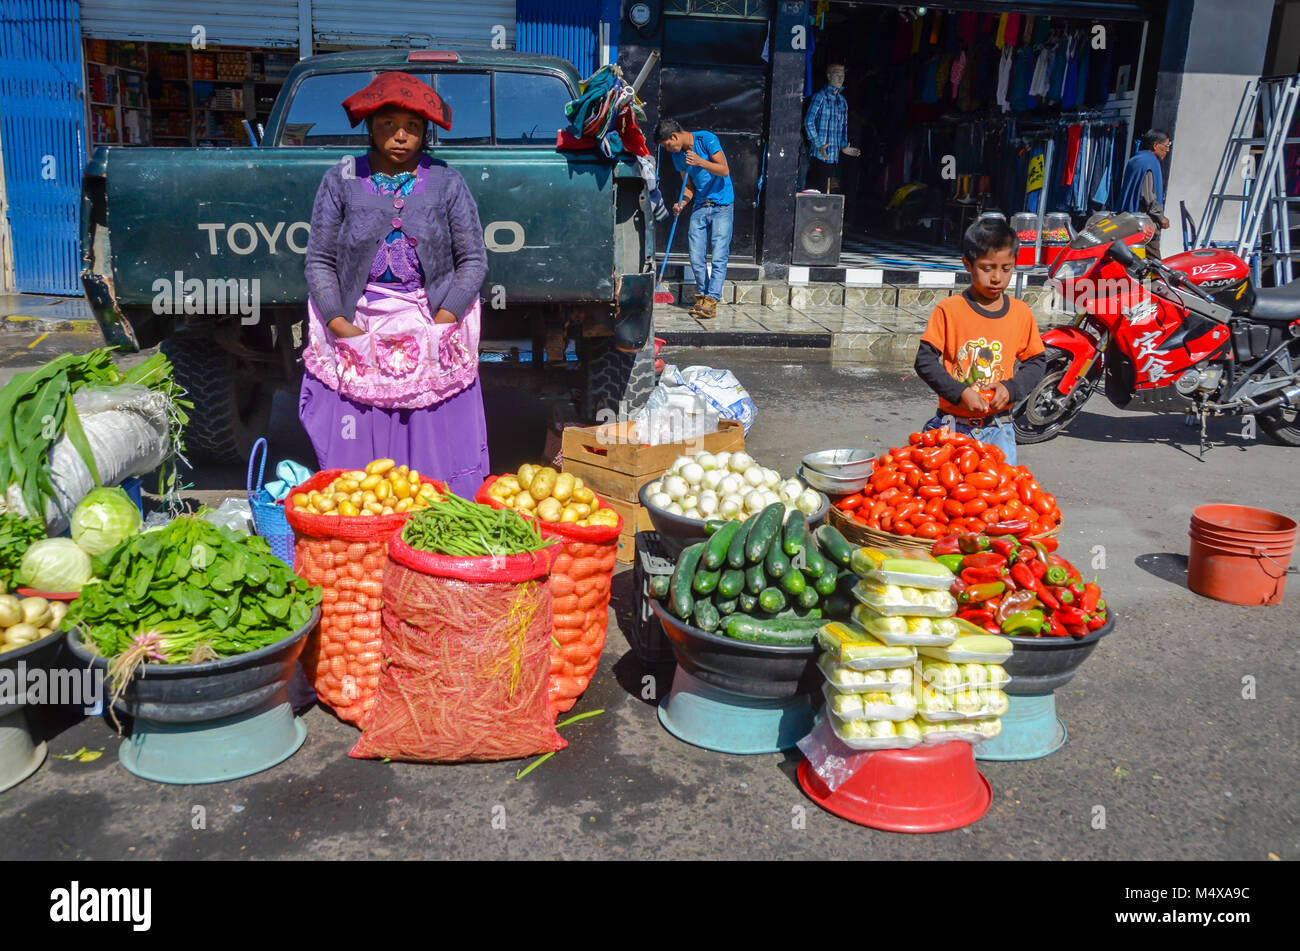 A Guatemalan woman wearing traditional dress and a young boy sell vegetables on a street market. Stock Photo